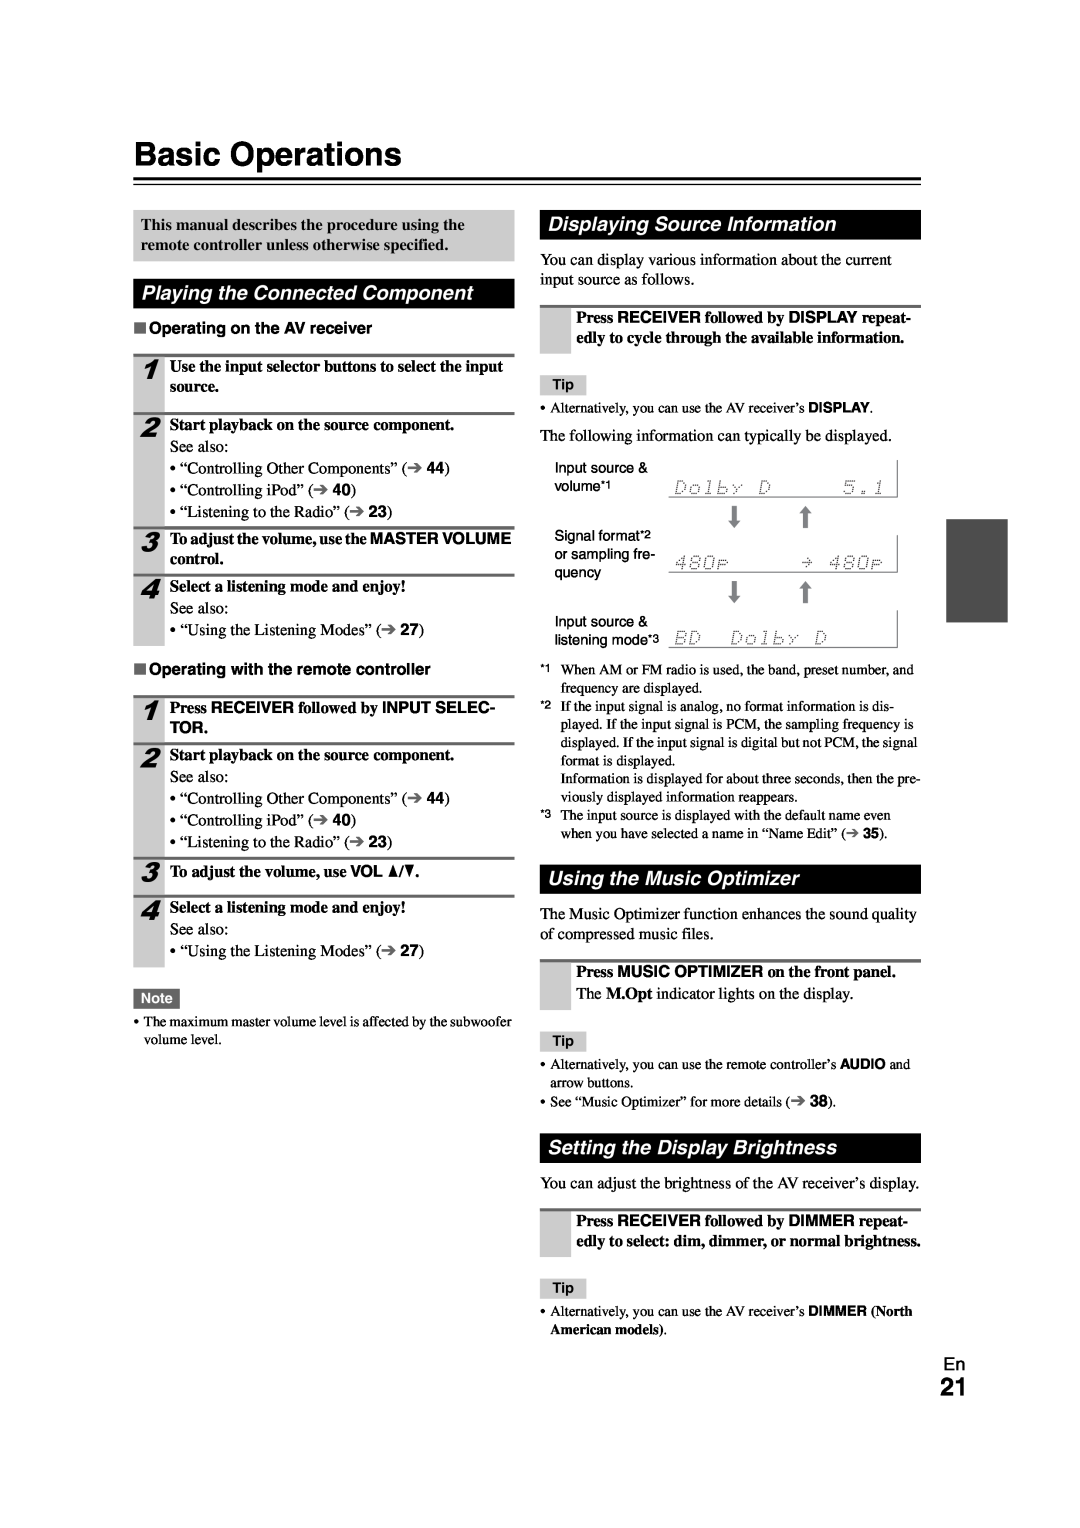 Onkyo HT-S3300 instruction manual Displaying Source Information, Using the Music Optimizer, Setting the Display Brightness 